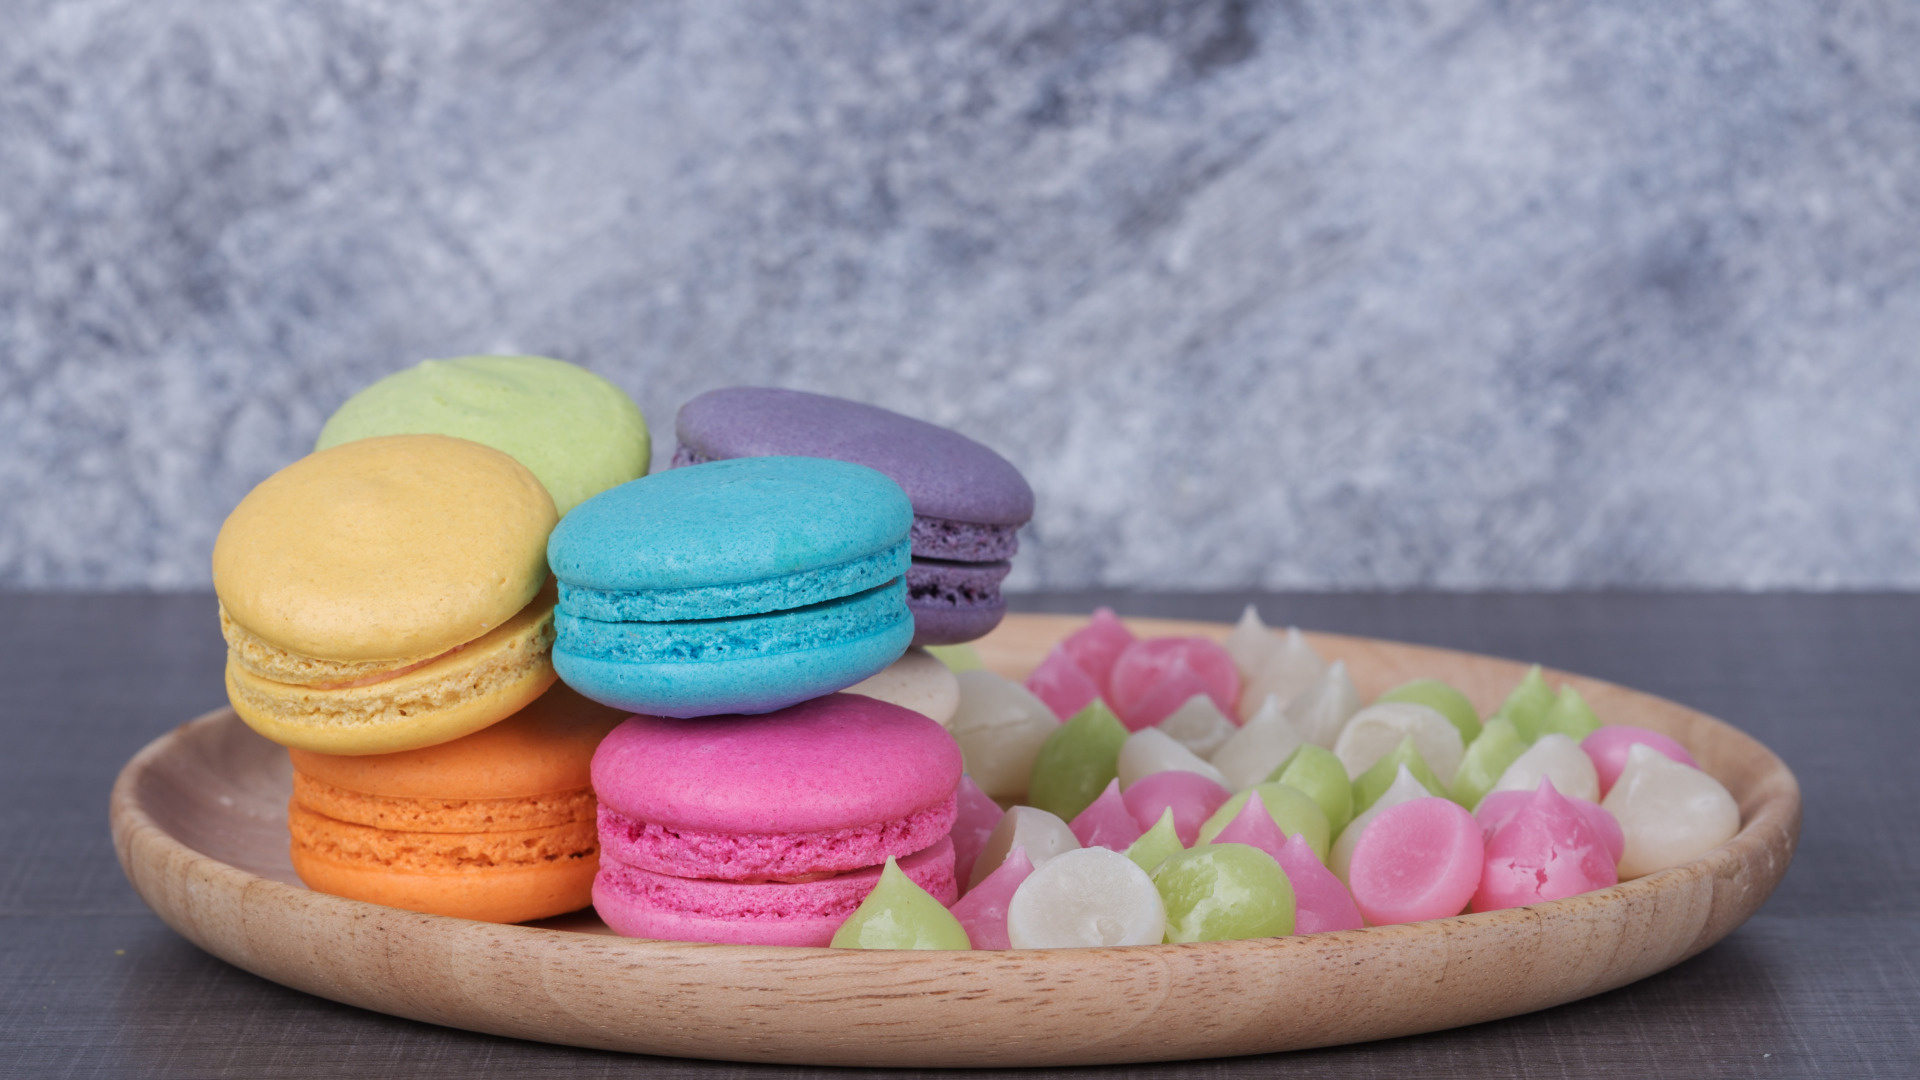 Macaron: Colorful dessert, Come in a variety of flavors. 1920x1080 Full HD Background.